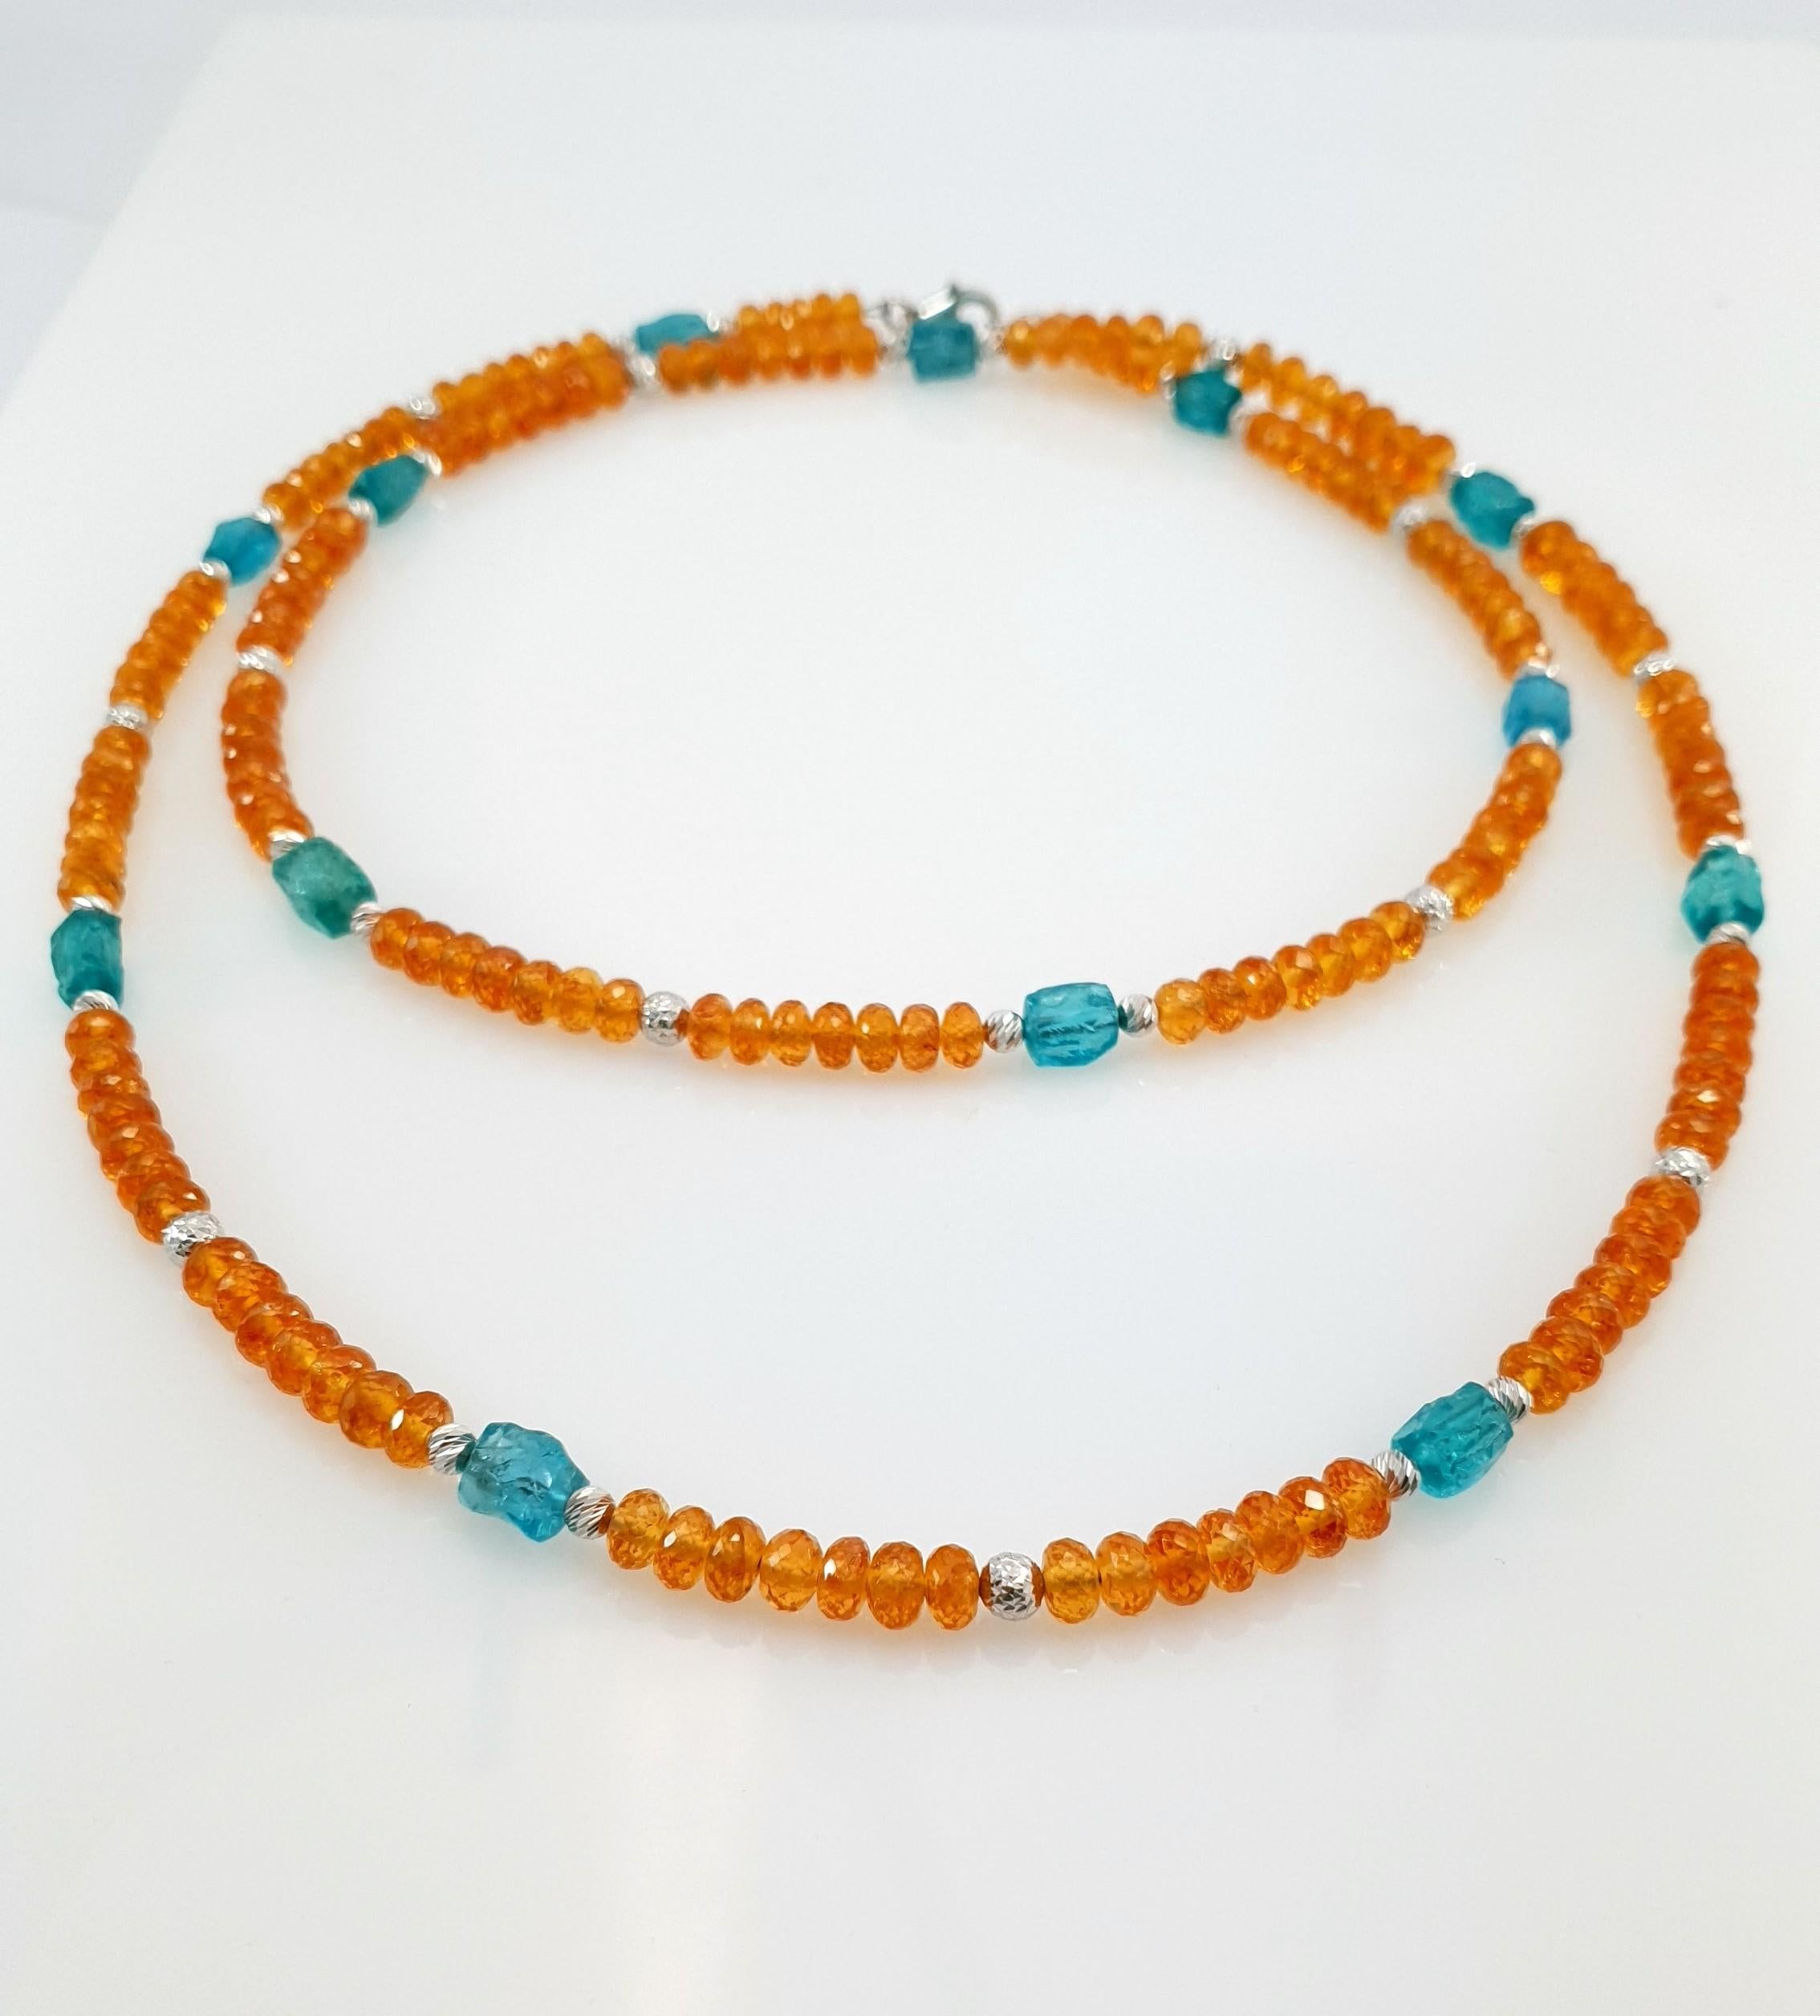 Orange Garnets and Paraiba Color Apatite Beads Necklace with 18 Carat White Gold 6